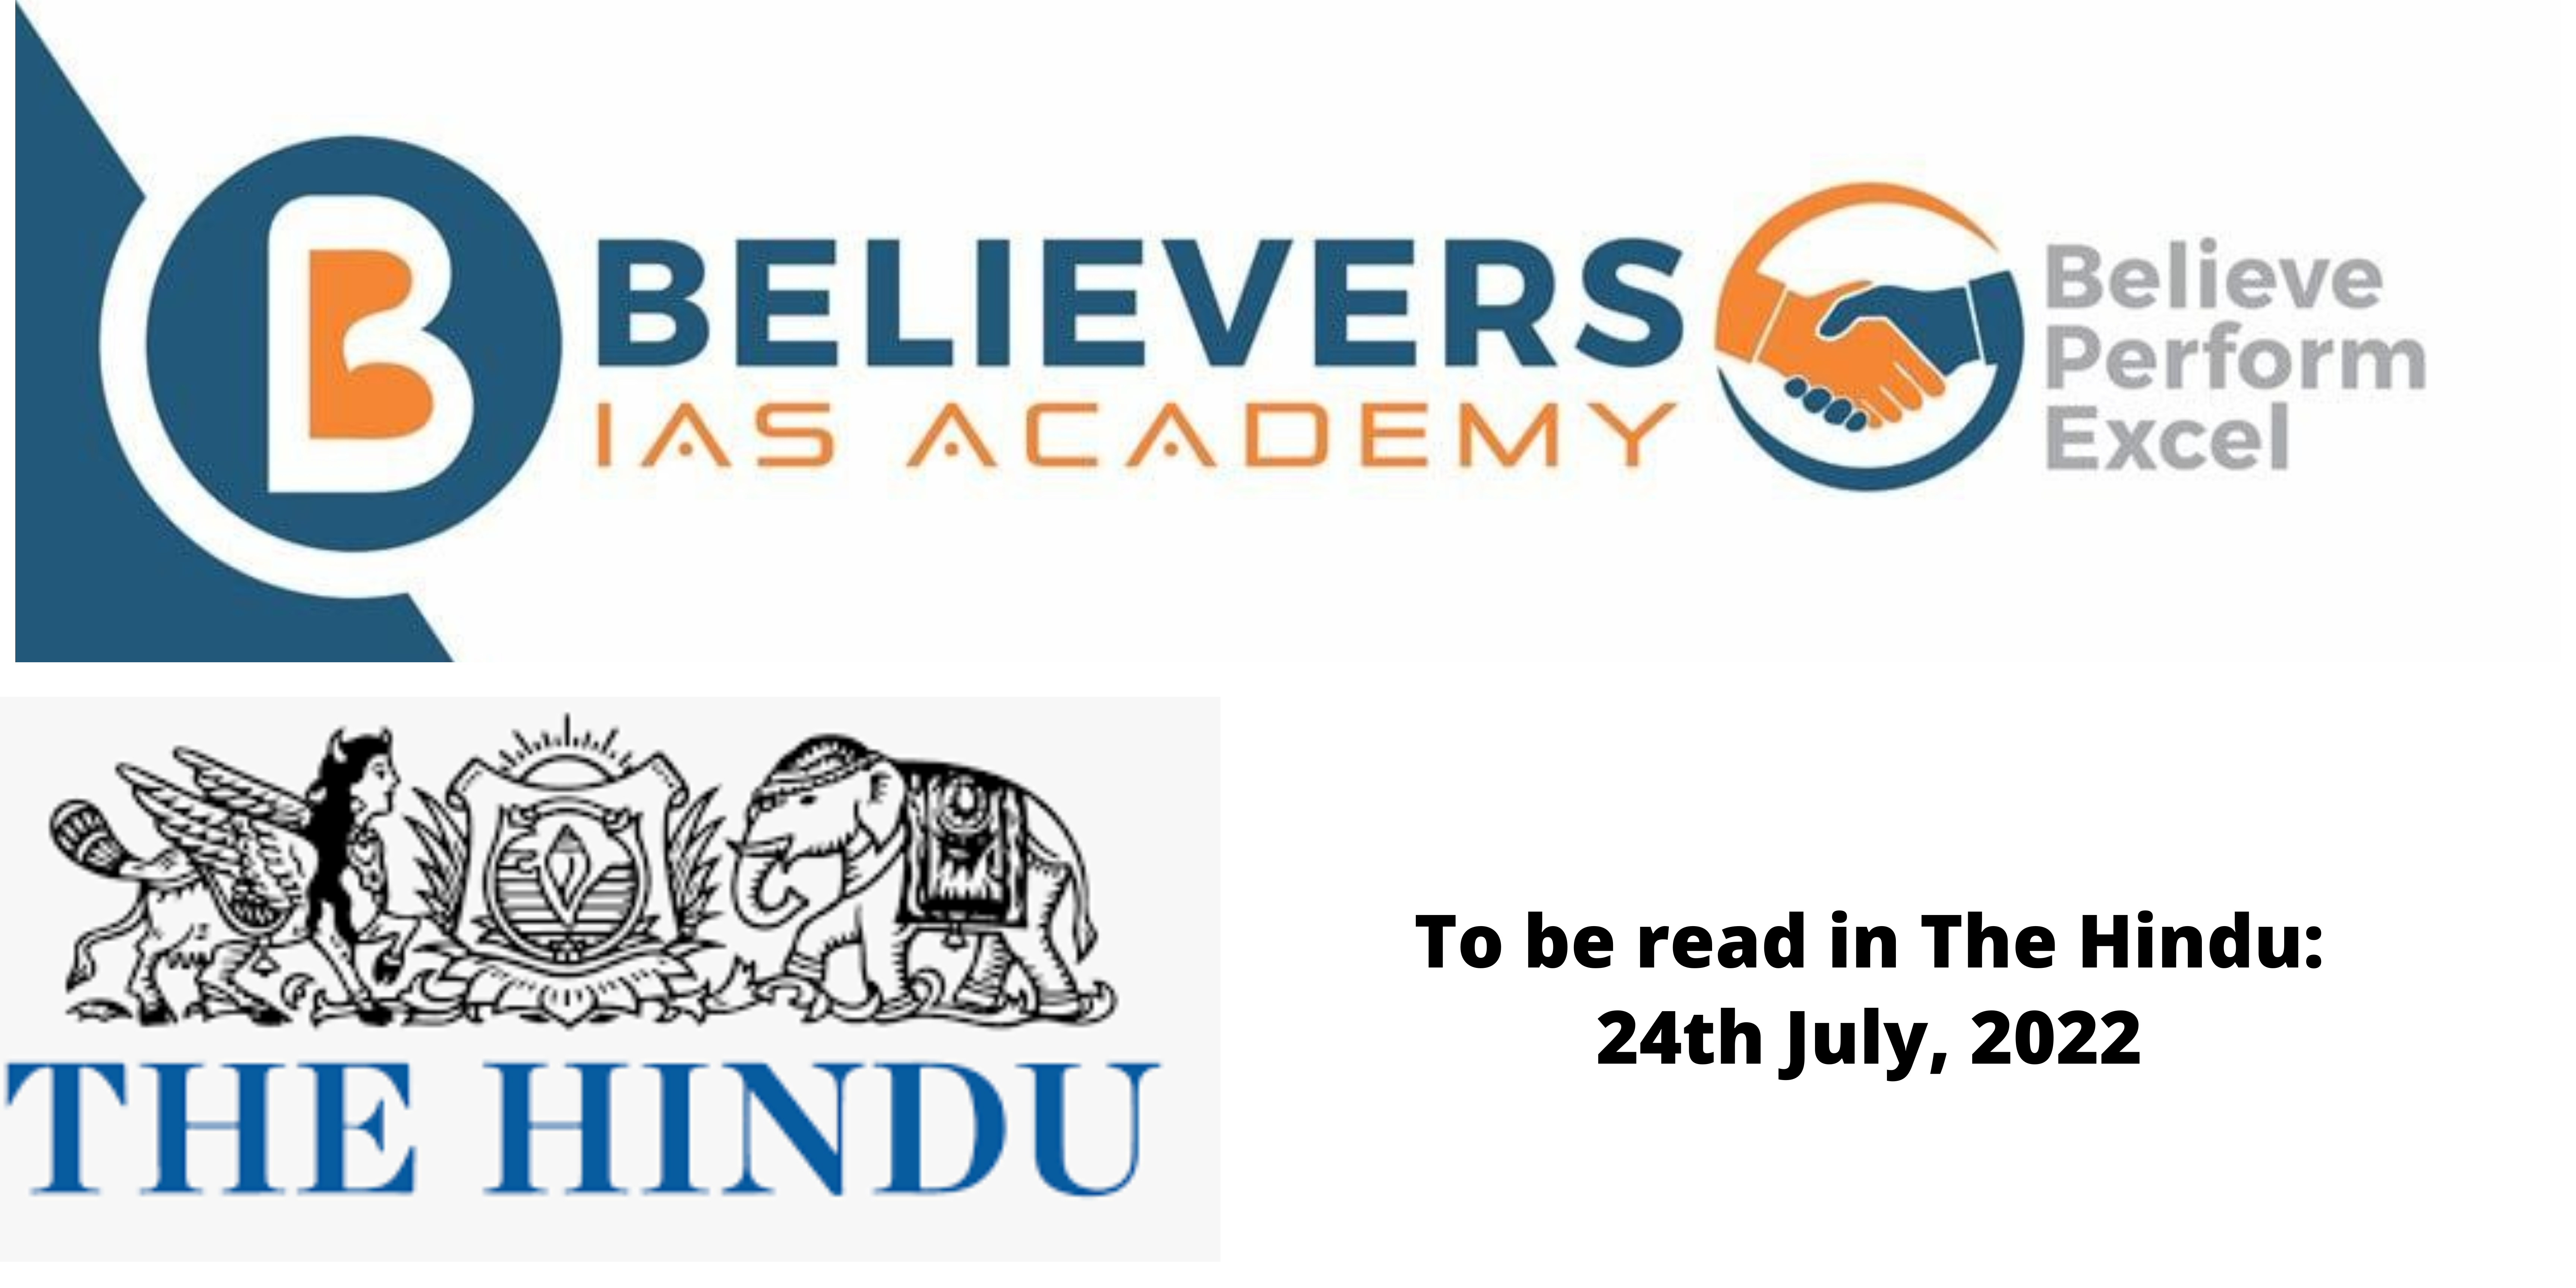 News articles for UPSC Exam preparation - 24th July, 2022